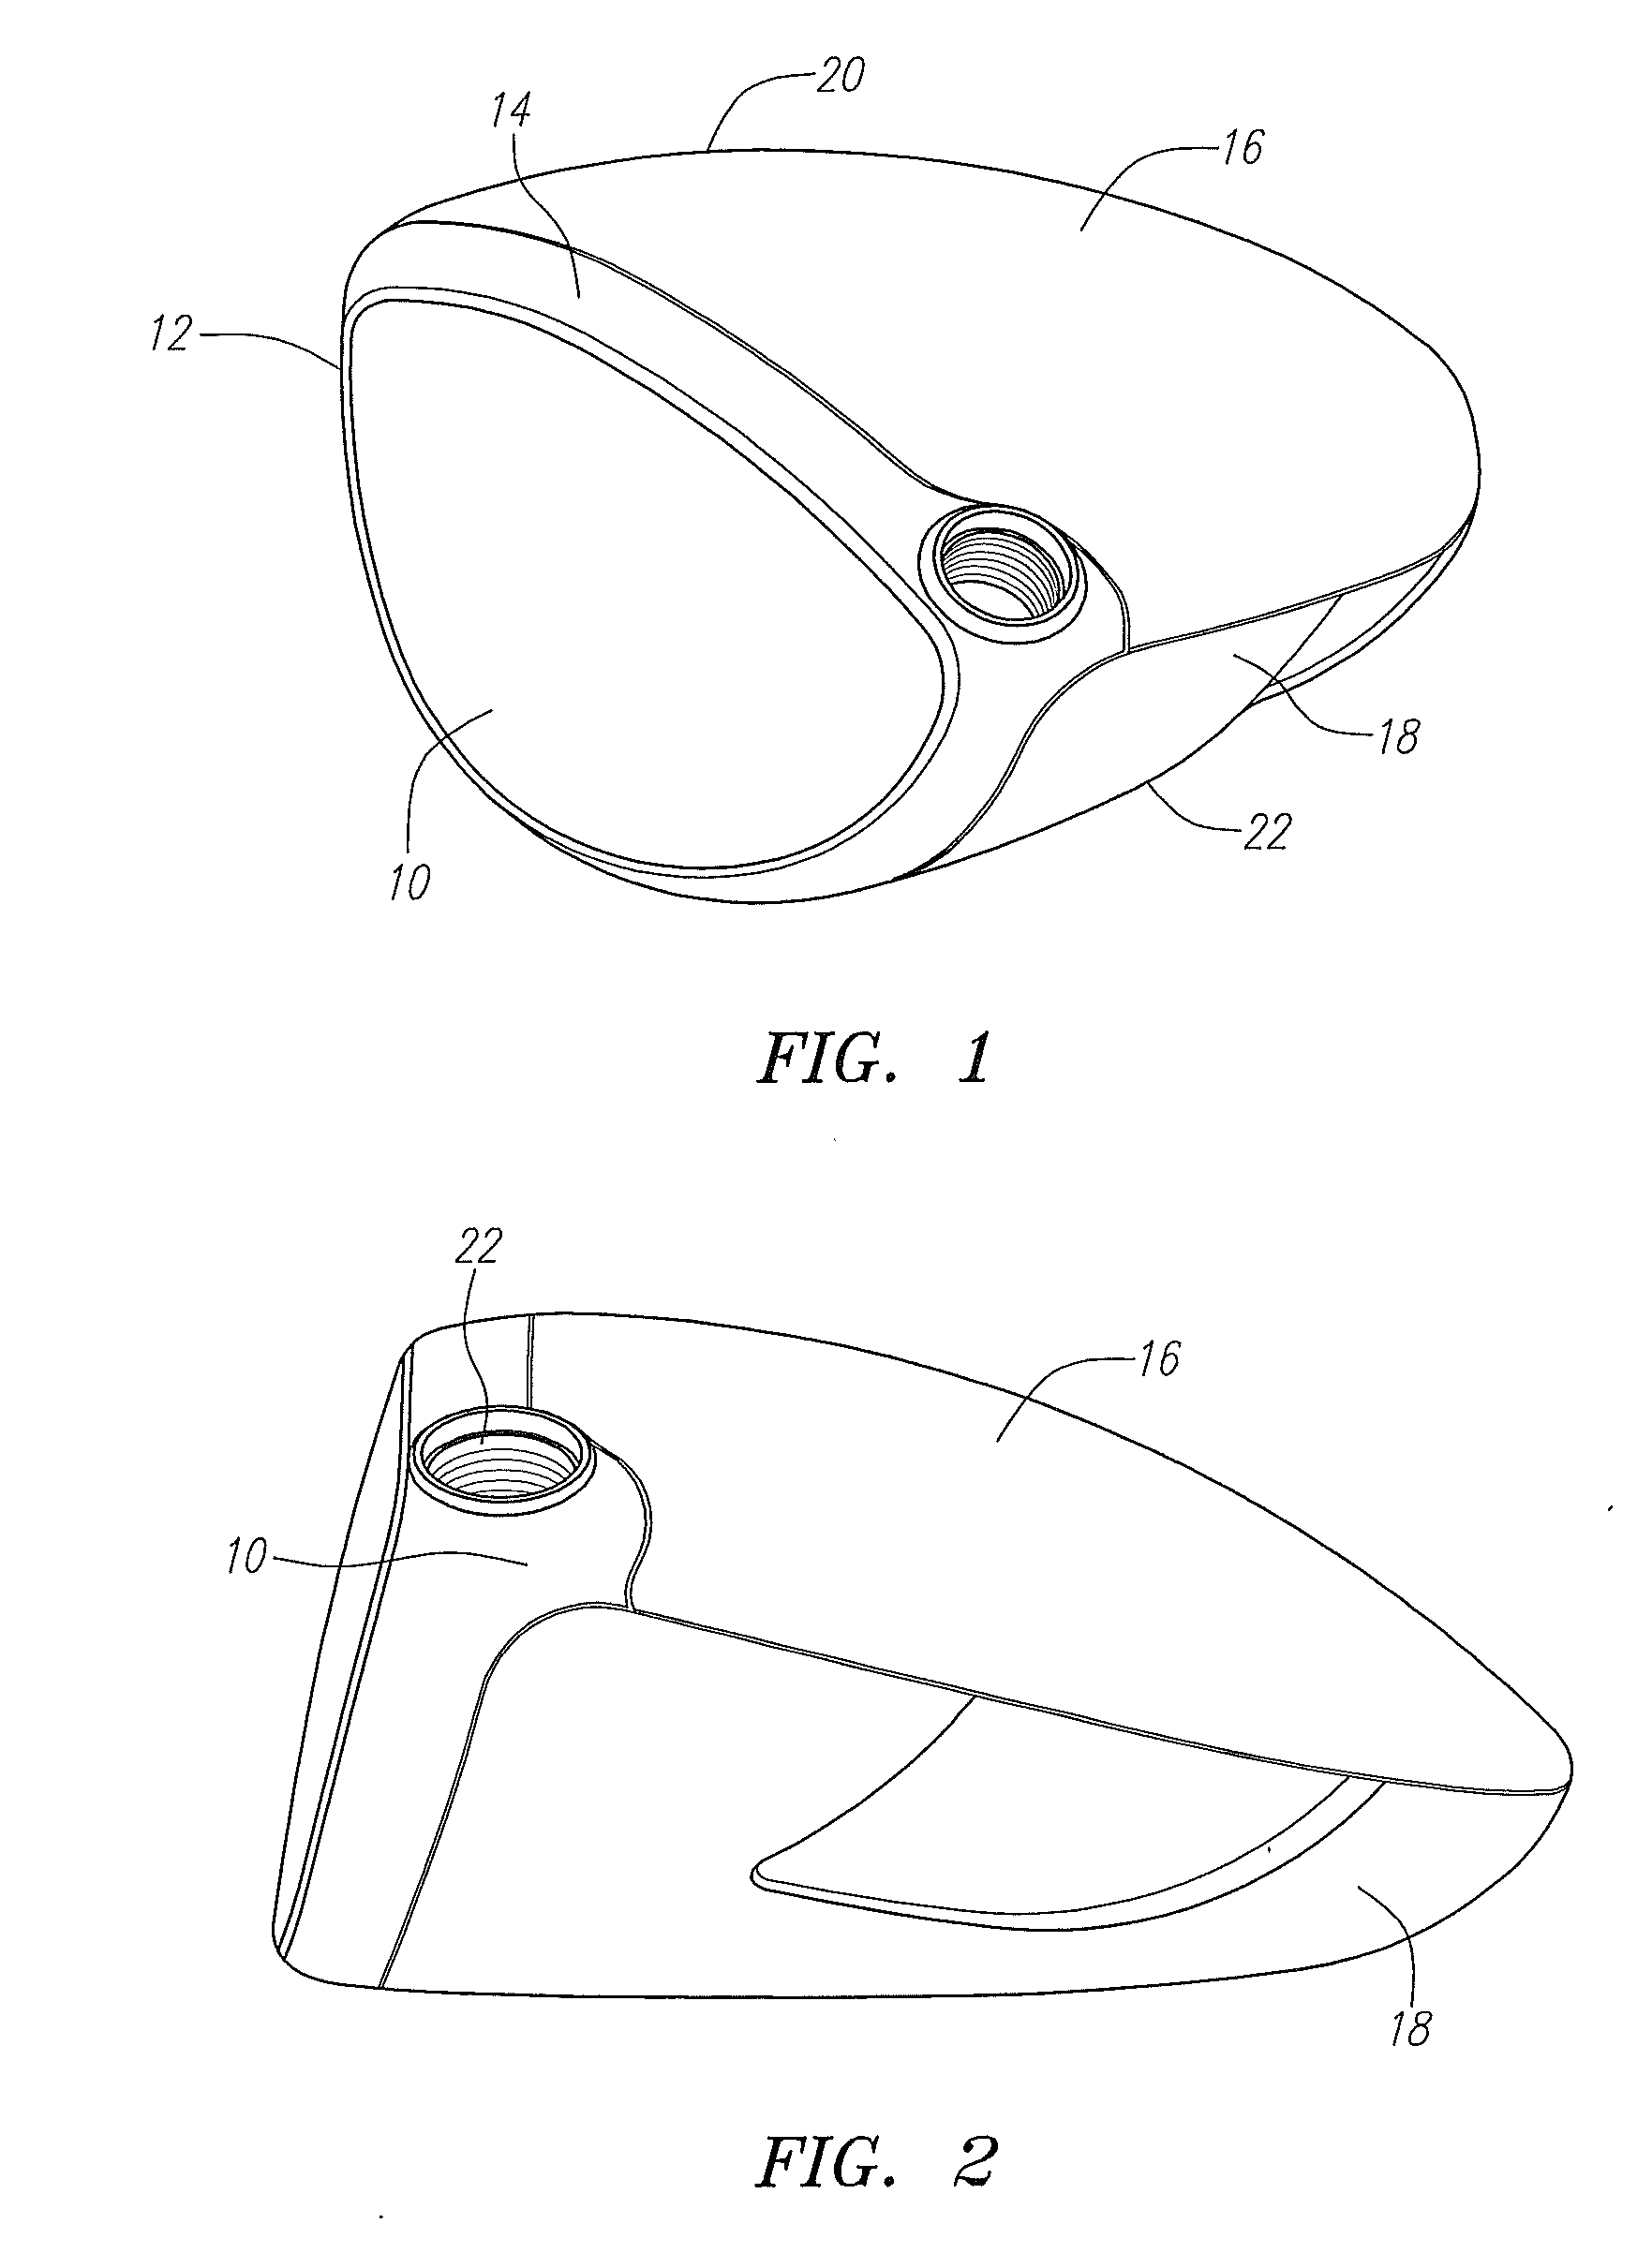 Method for forming a multiple material golf club head